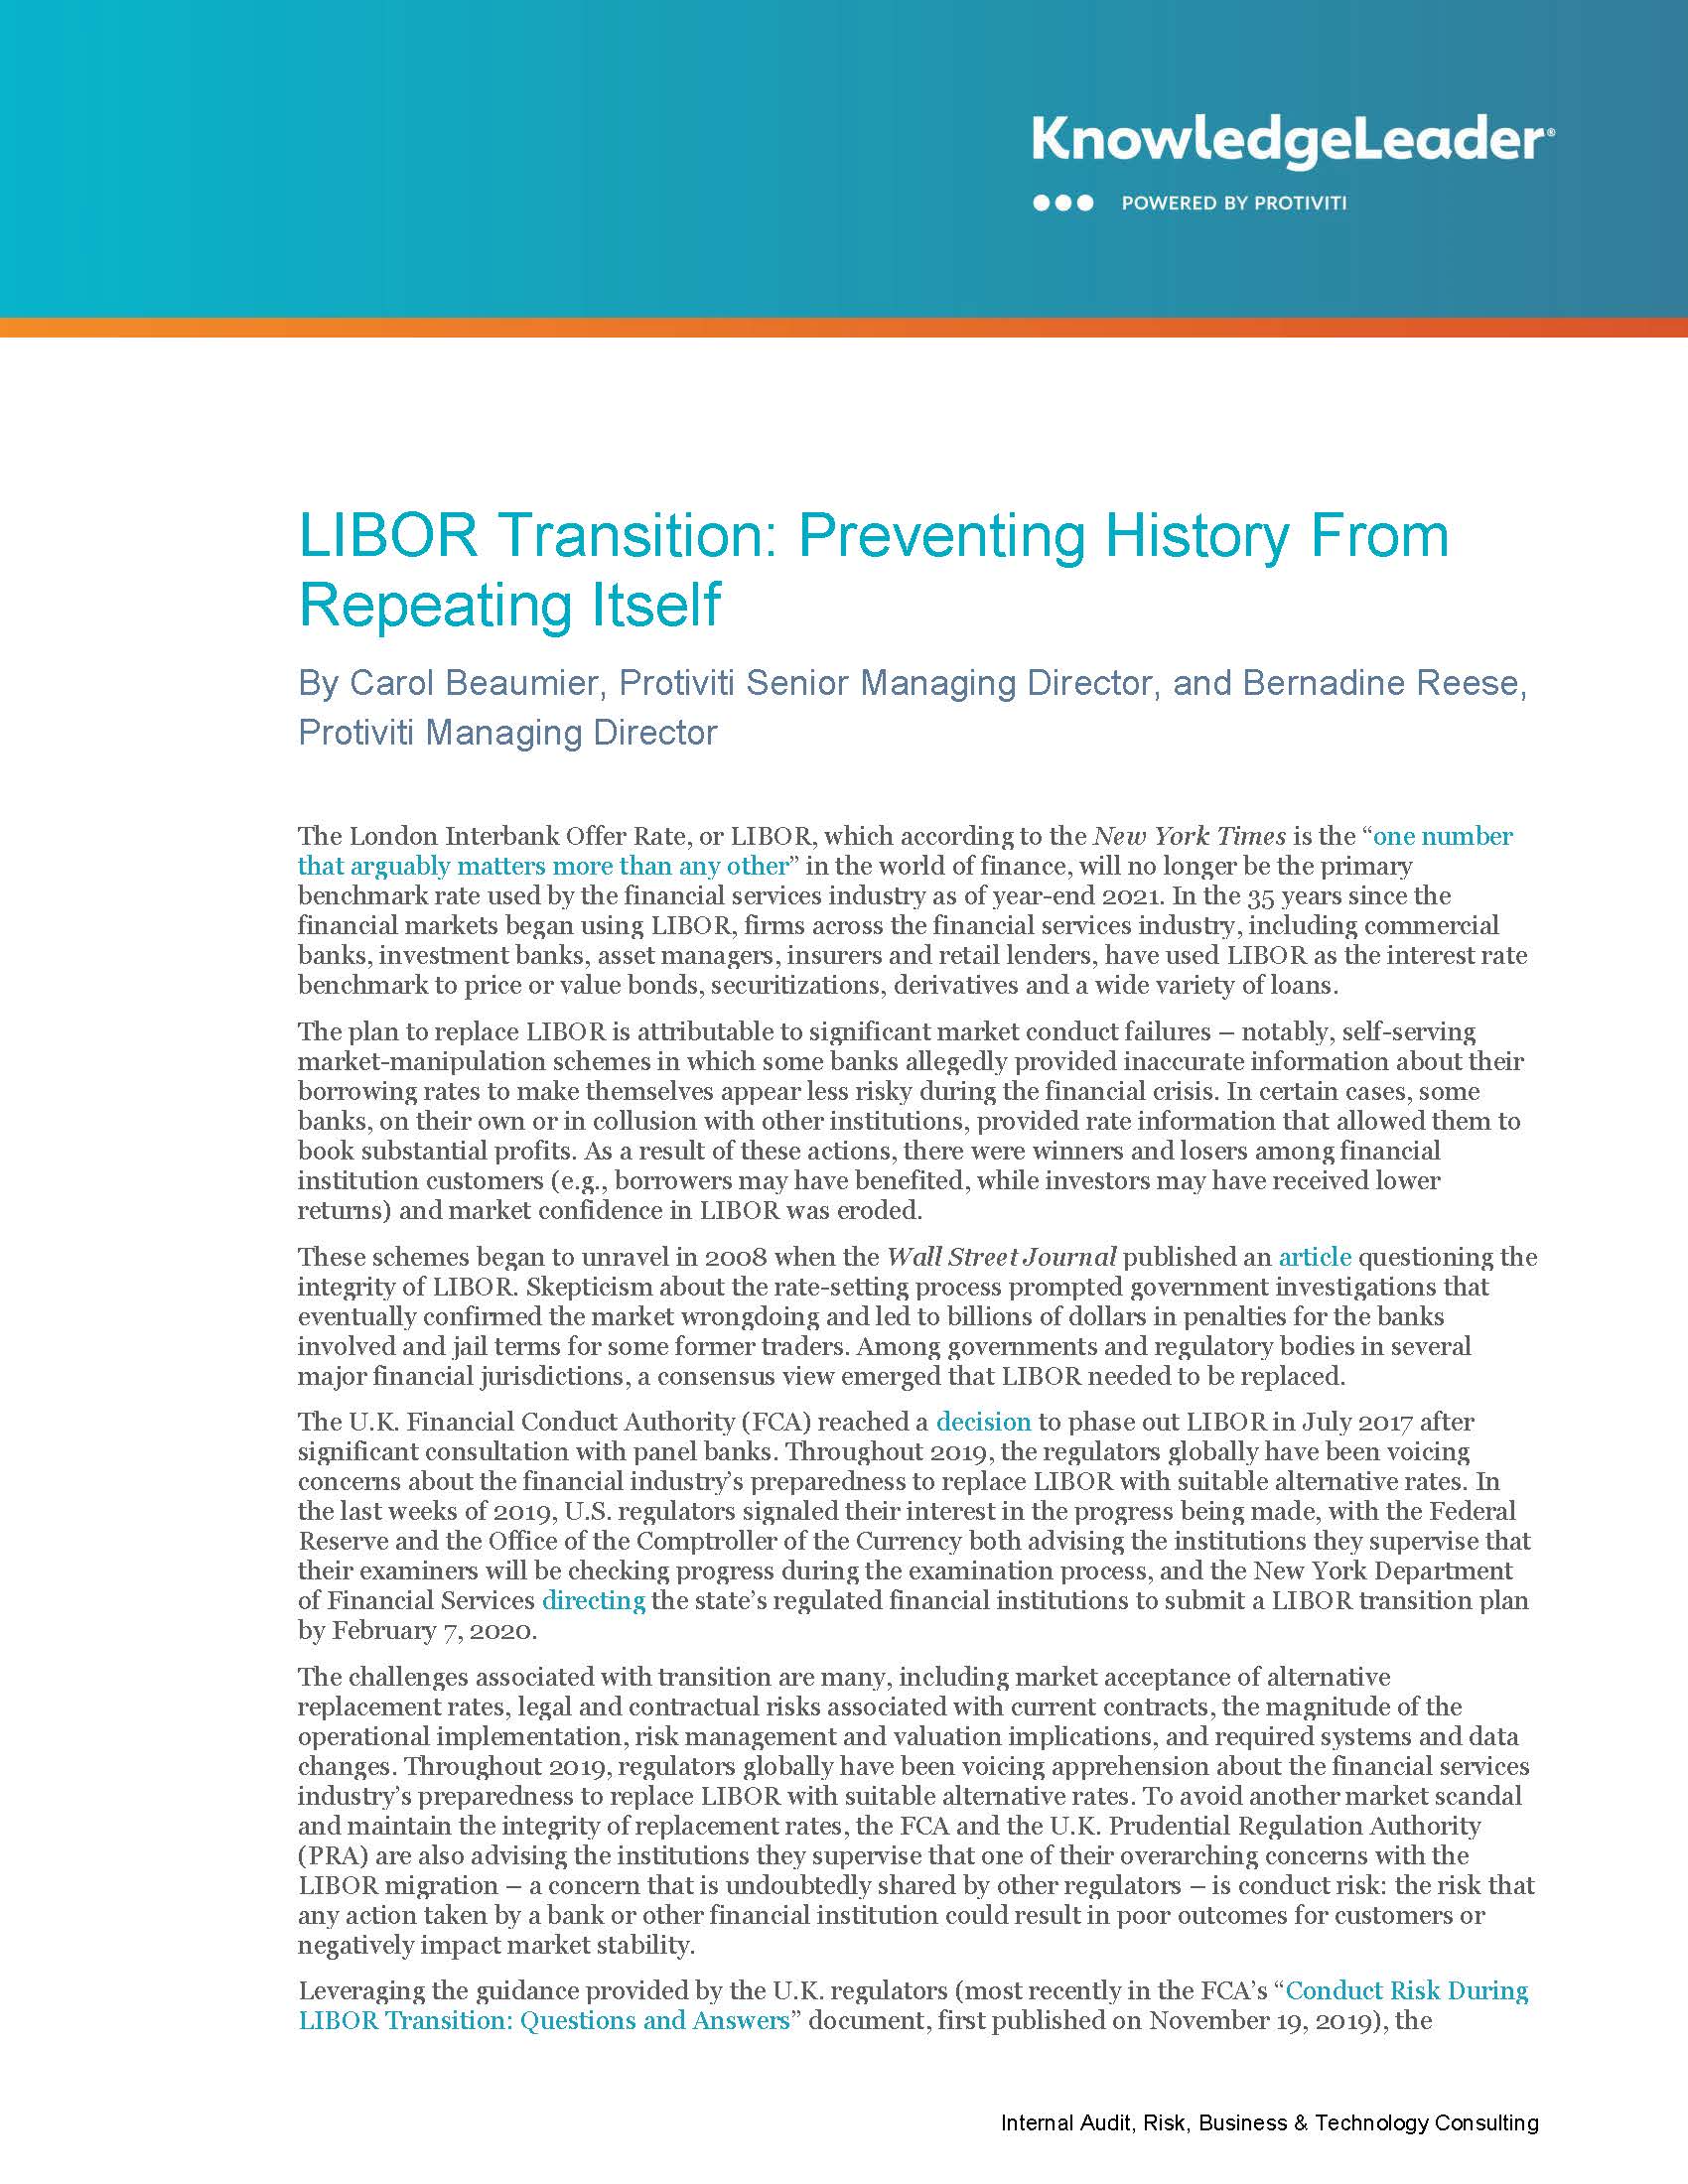 Screenshot of the first page of LIBOR Transition Preventing History From Repeating Itself